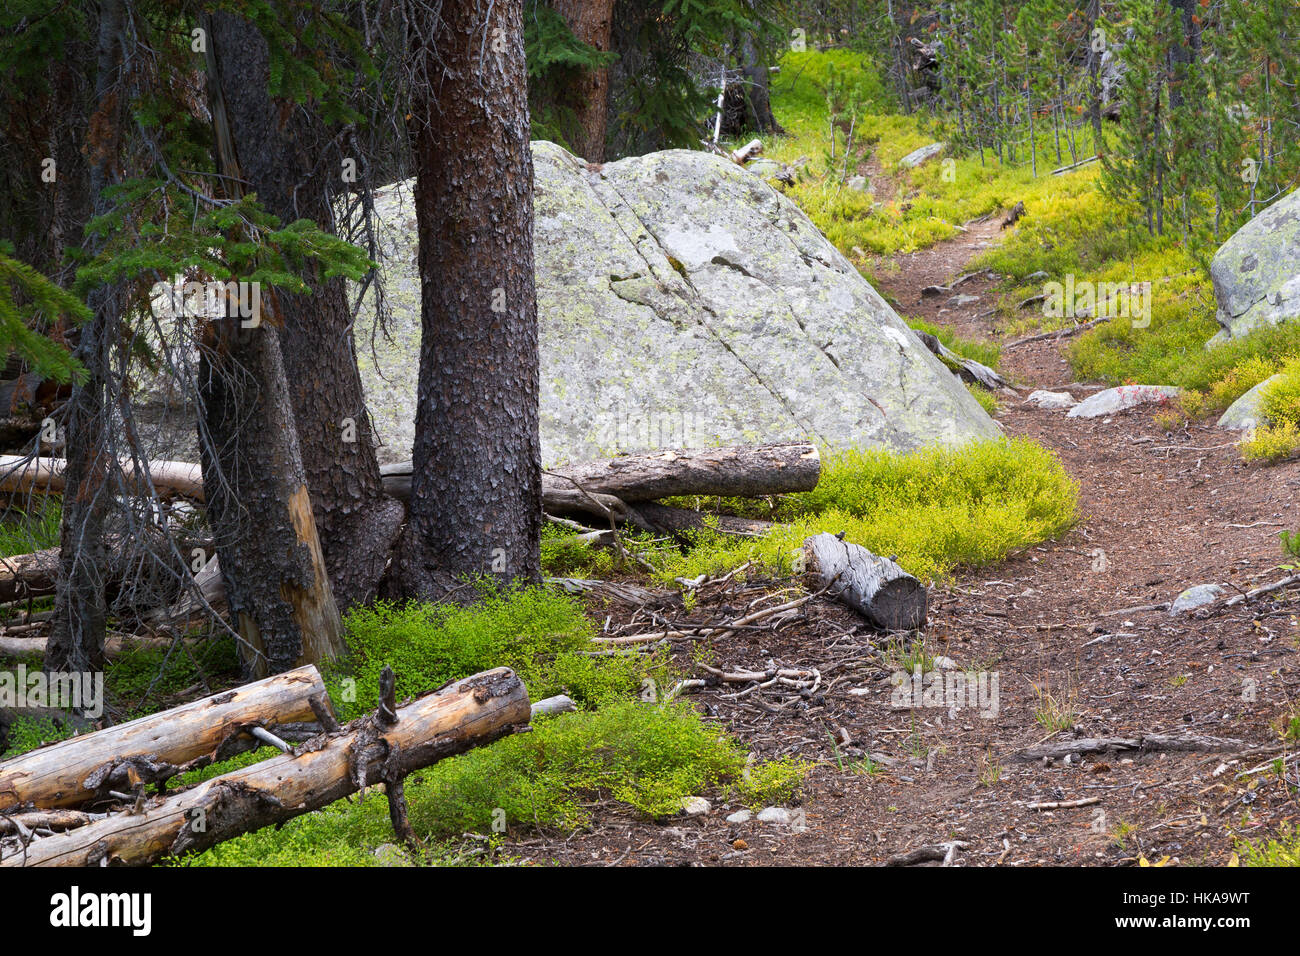 The Beartooth Loop Trail ascending through an evergreen forest in the Beartooth Mountains. Shoshone National Forest, Wyoming Stock Photo